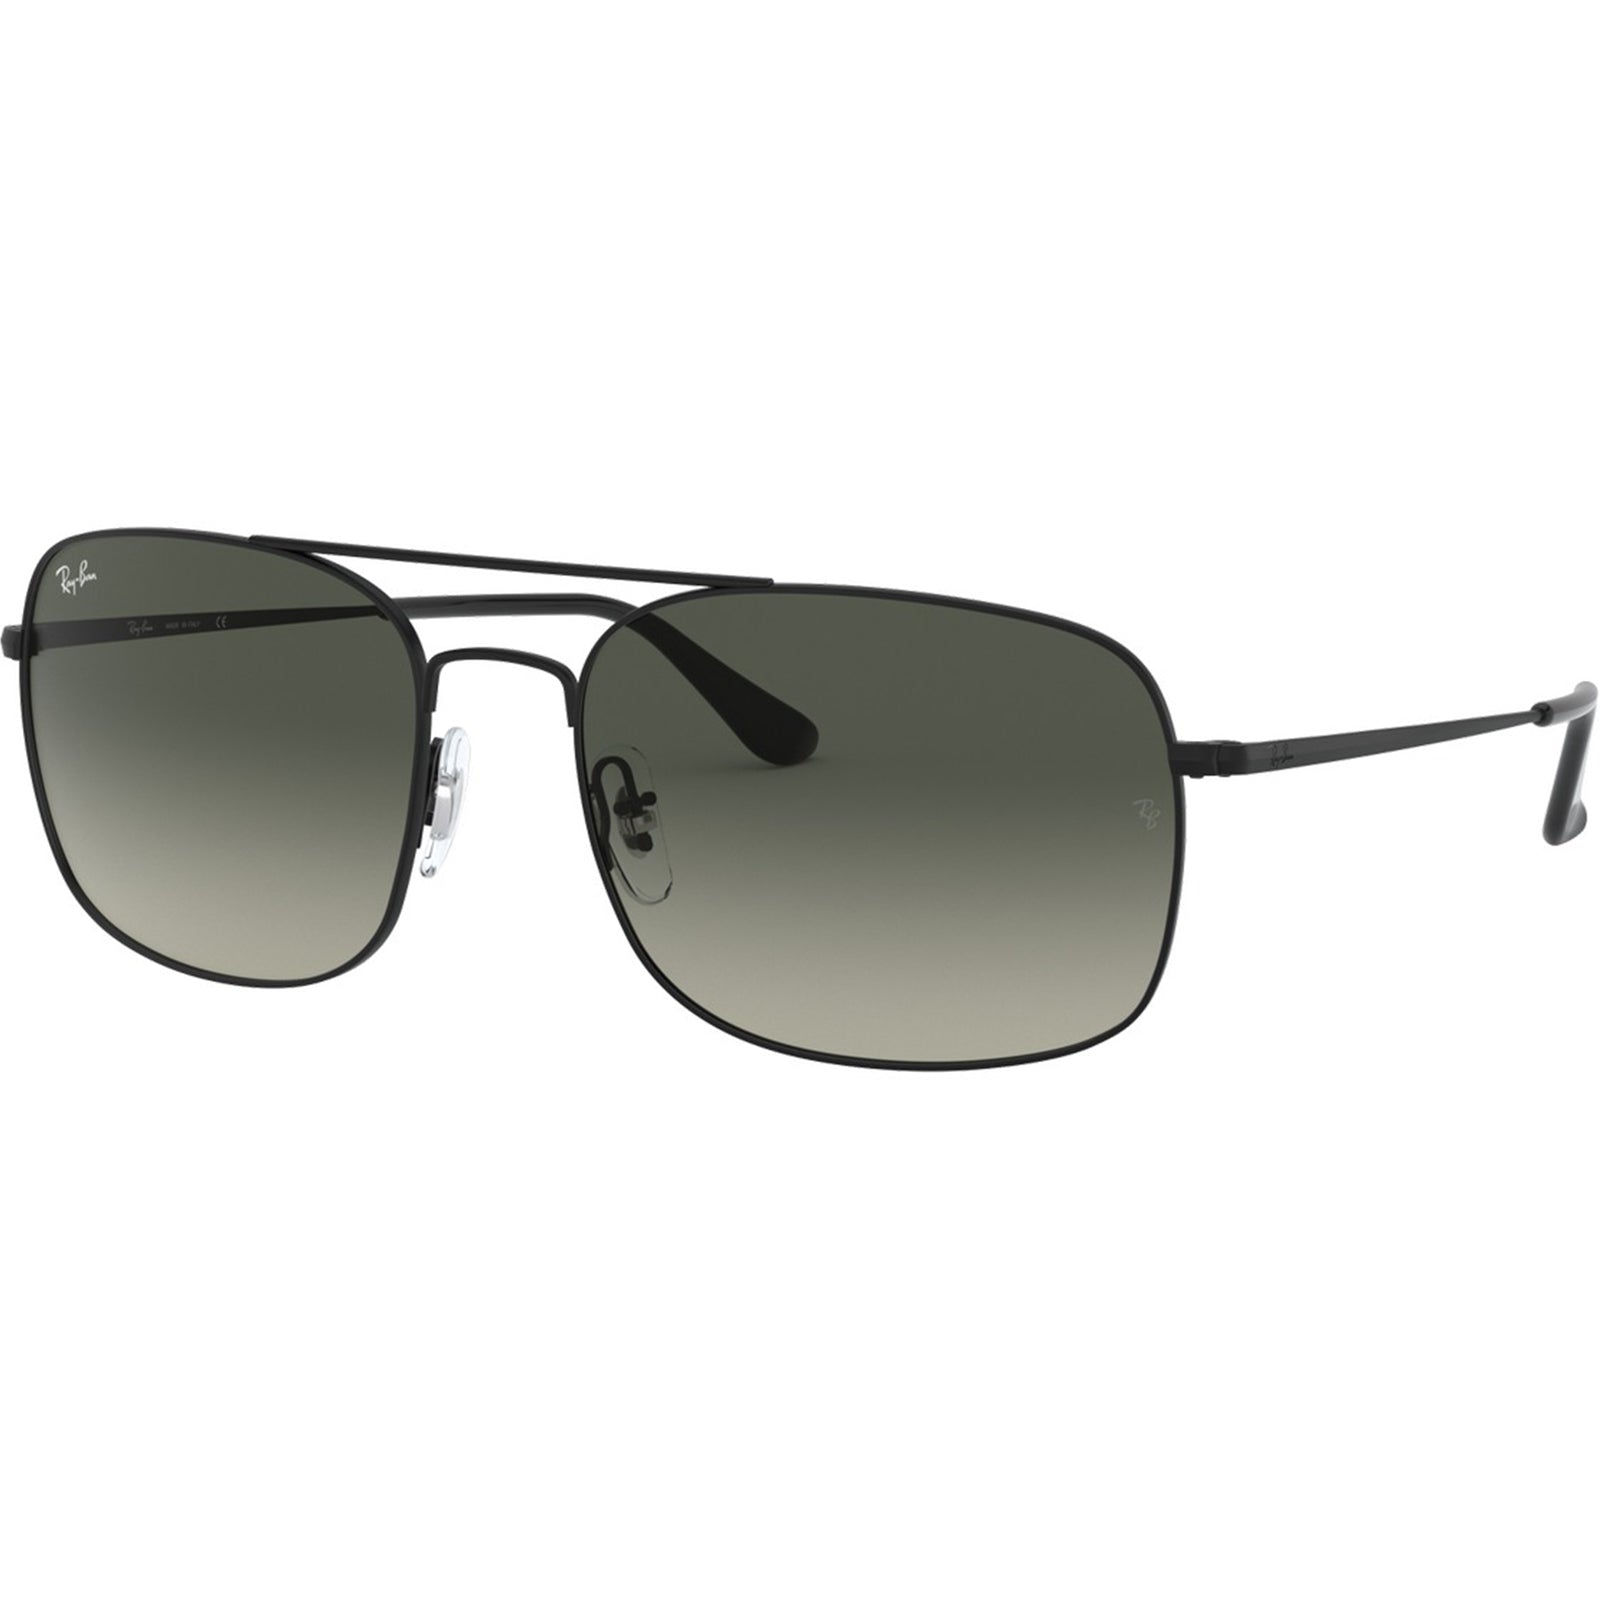 Ray-Ban RB3611 Adult Lifestyle Sunglasses-0RB3611